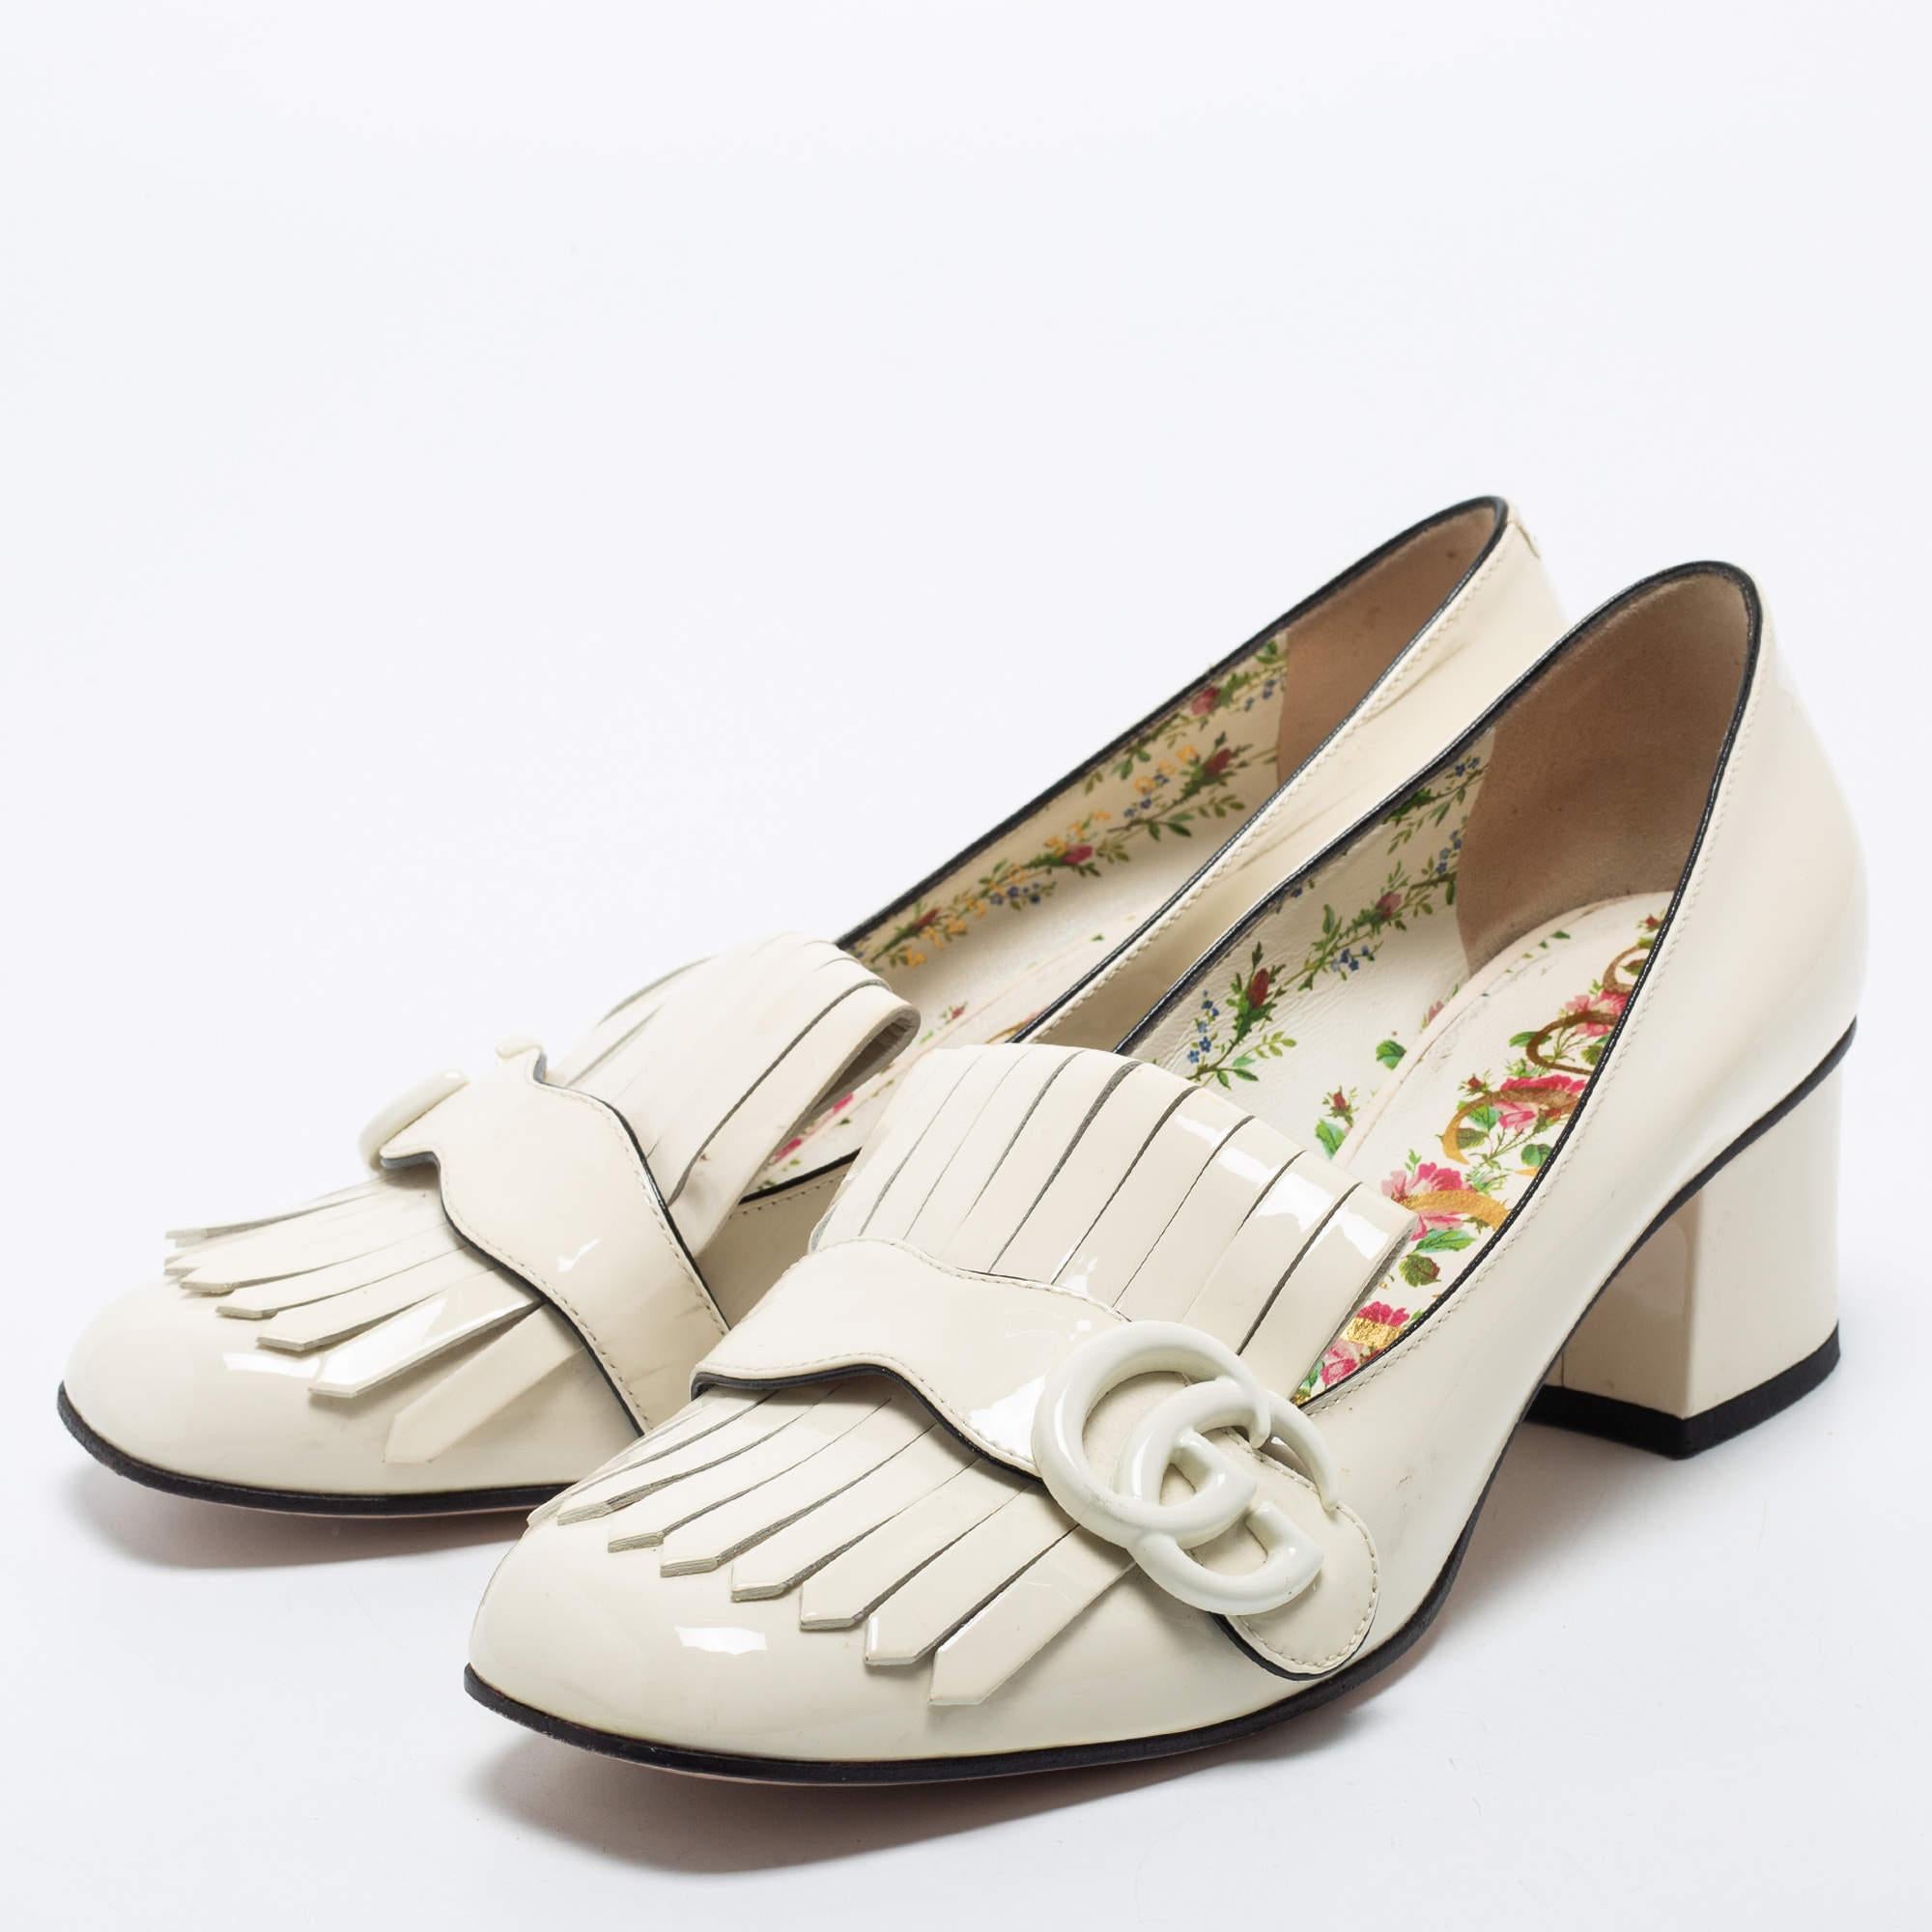 Women's Gucci Cream Patent Leather Double G Fringes Mid Heel Pumps Size 37.5